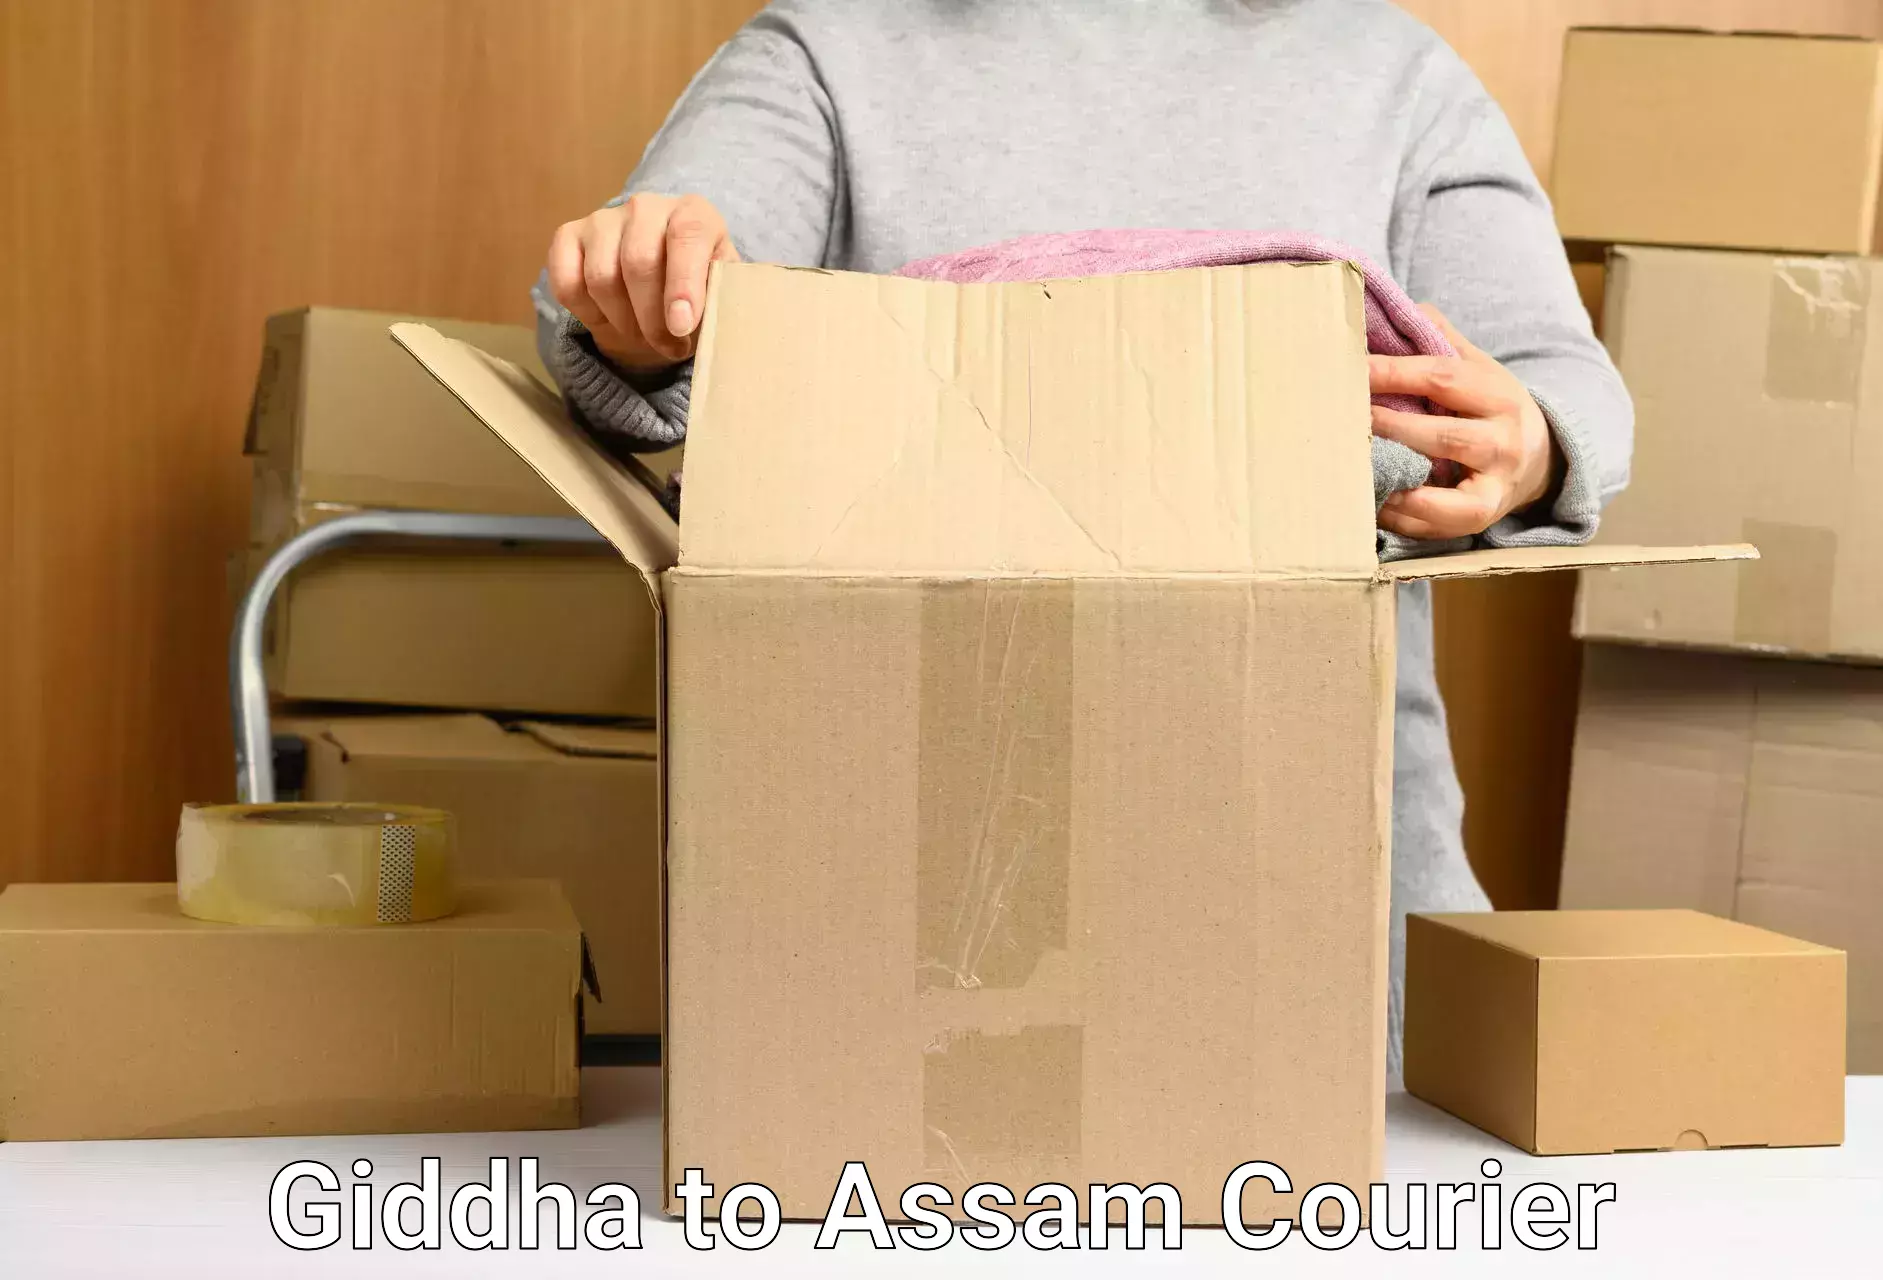 Urban courier service Giddha to Lala Assam